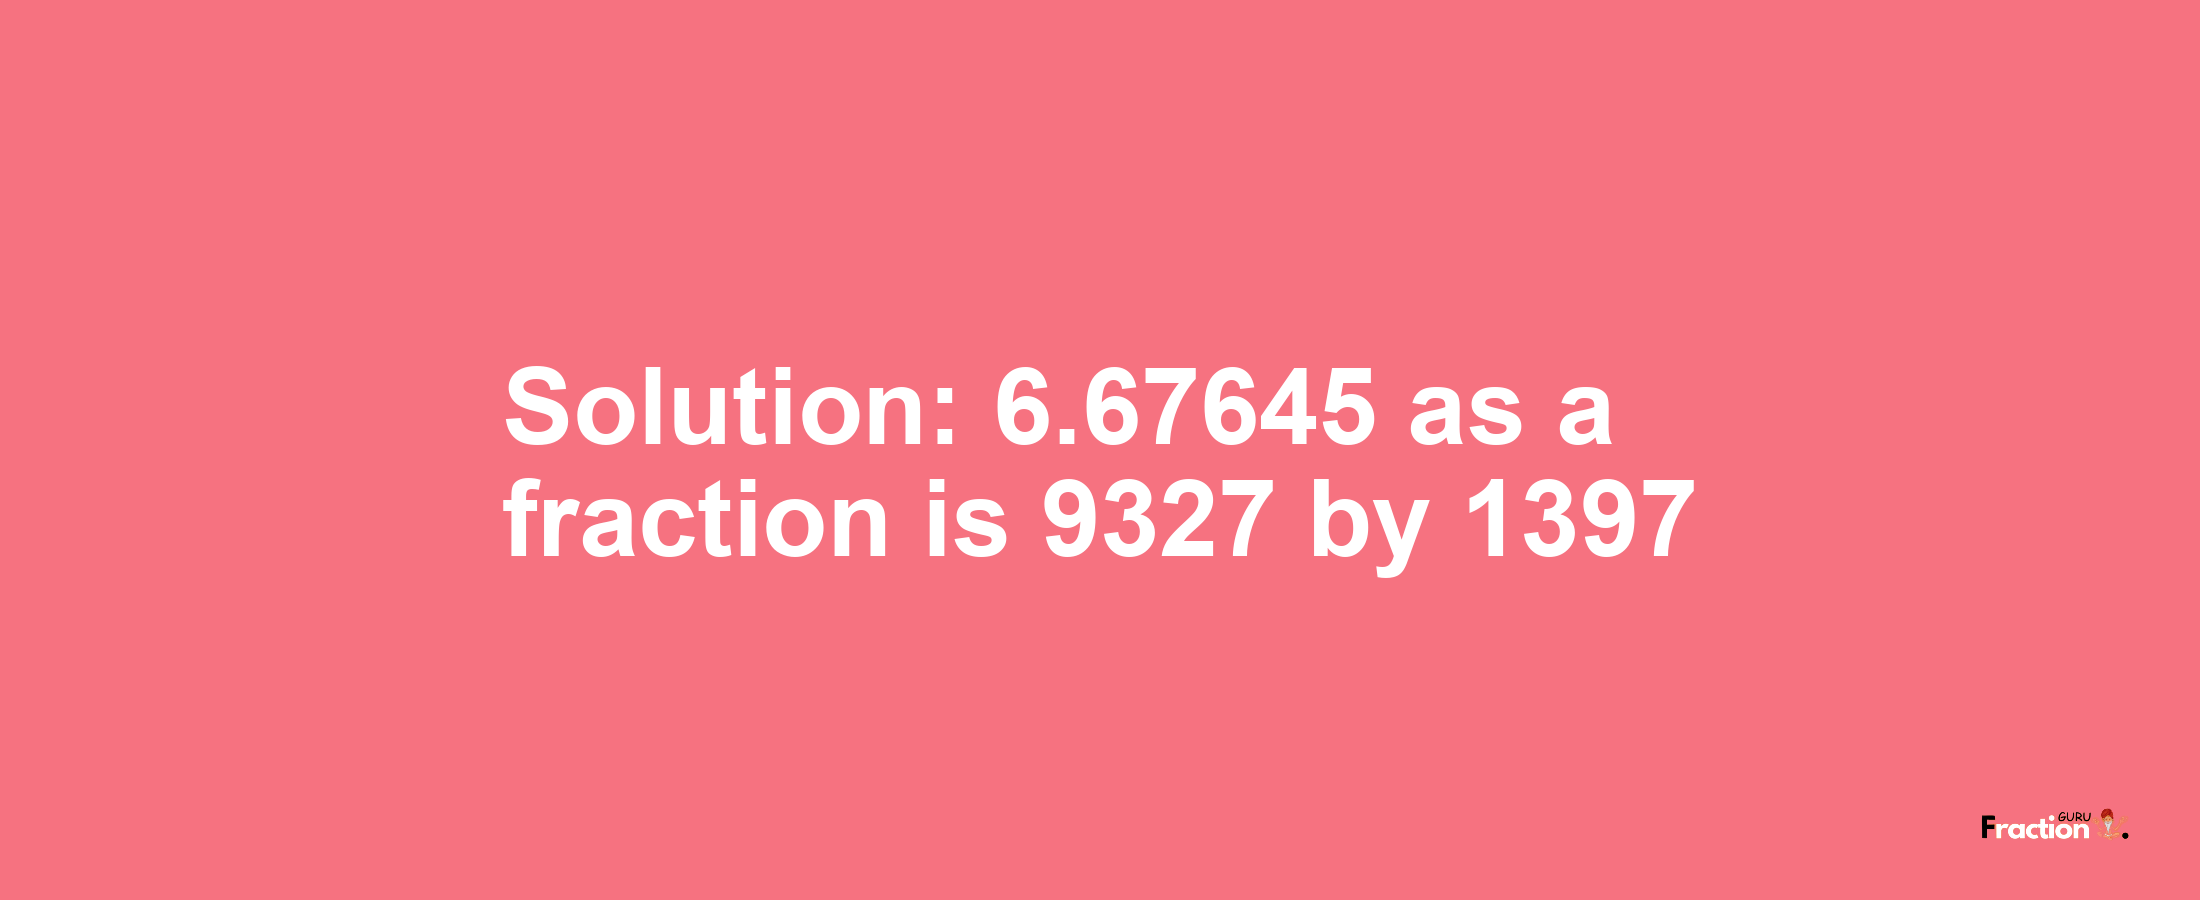 Solution:6.67645 as a fraction is 9327/1397